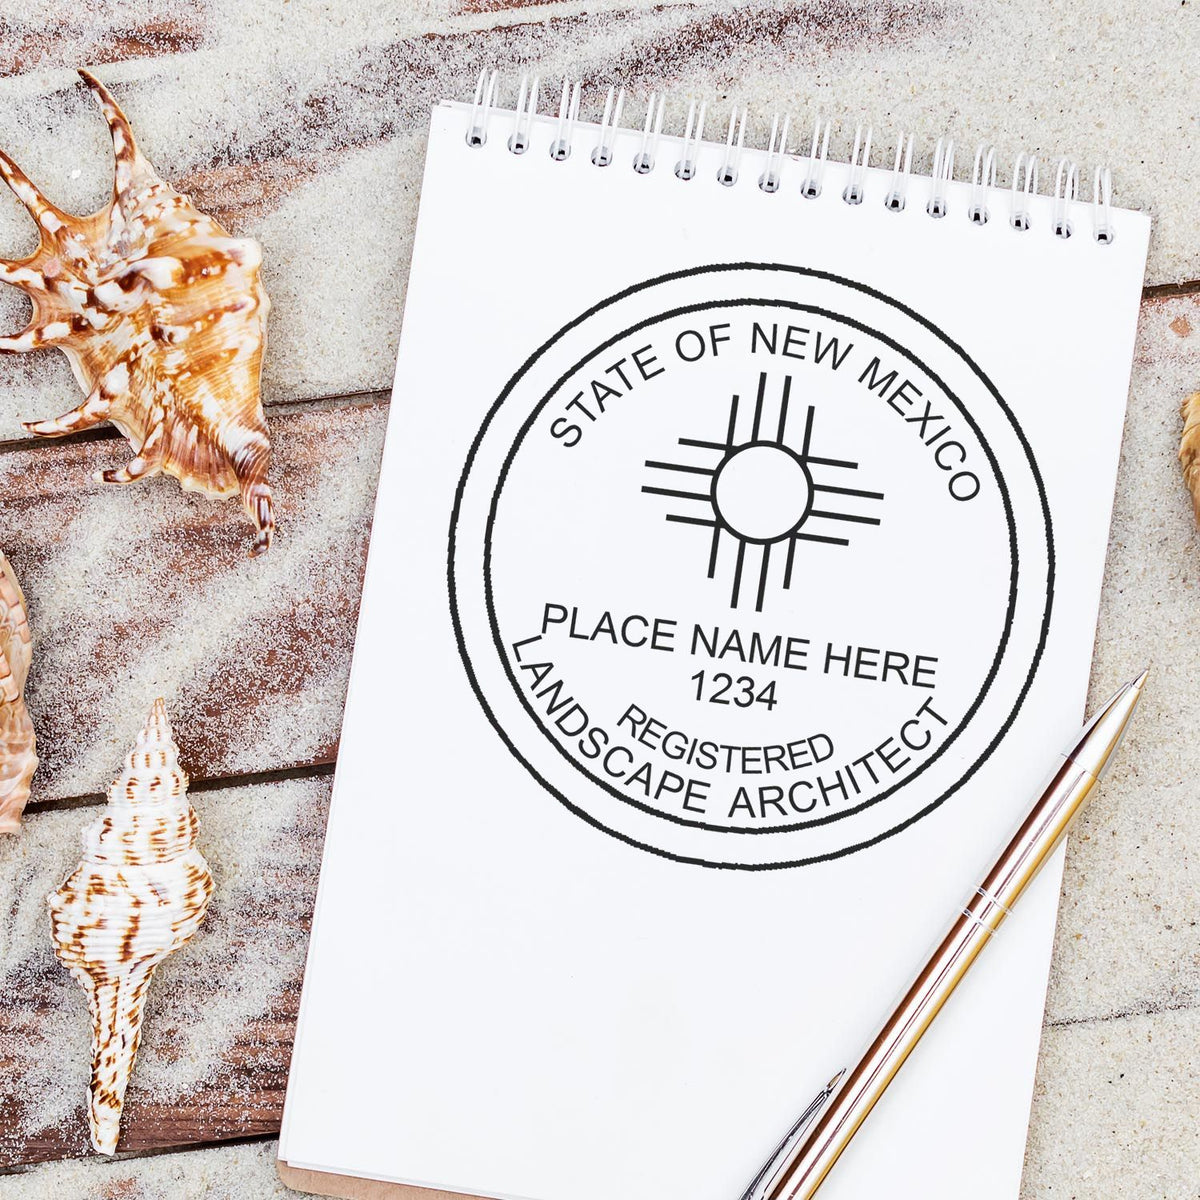 This paper is stamped with a sample imprint of the Slim Pre-Inked New Mexico Landscape Architect Seal Stamp, signifying its quality and reliability.